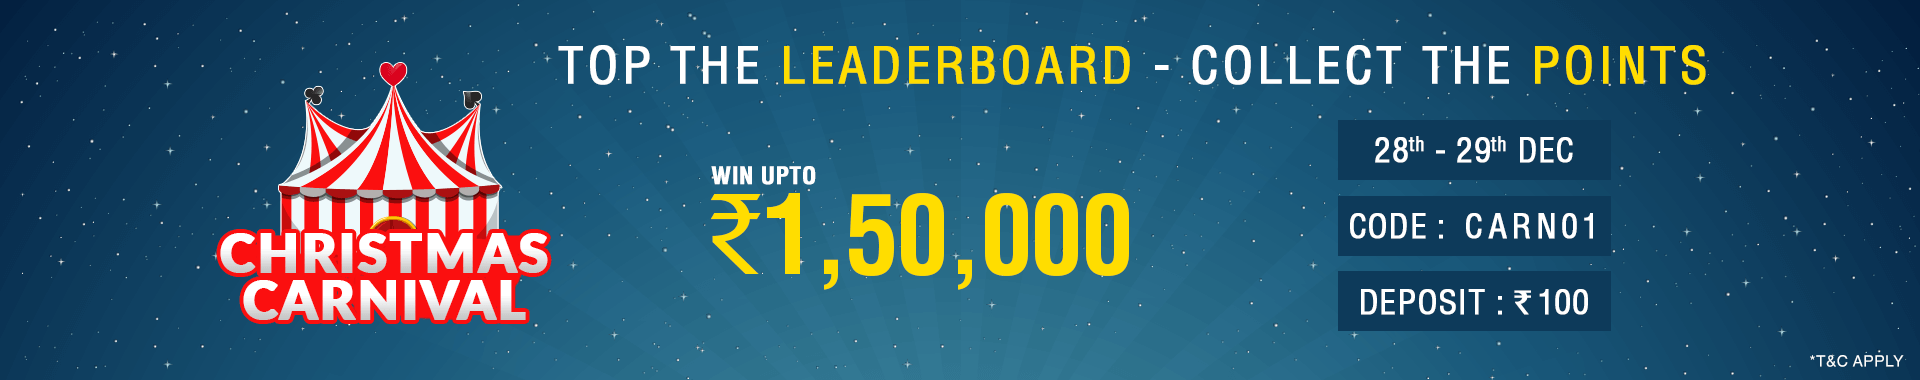 Christmas Carnival Leaderboard Contest